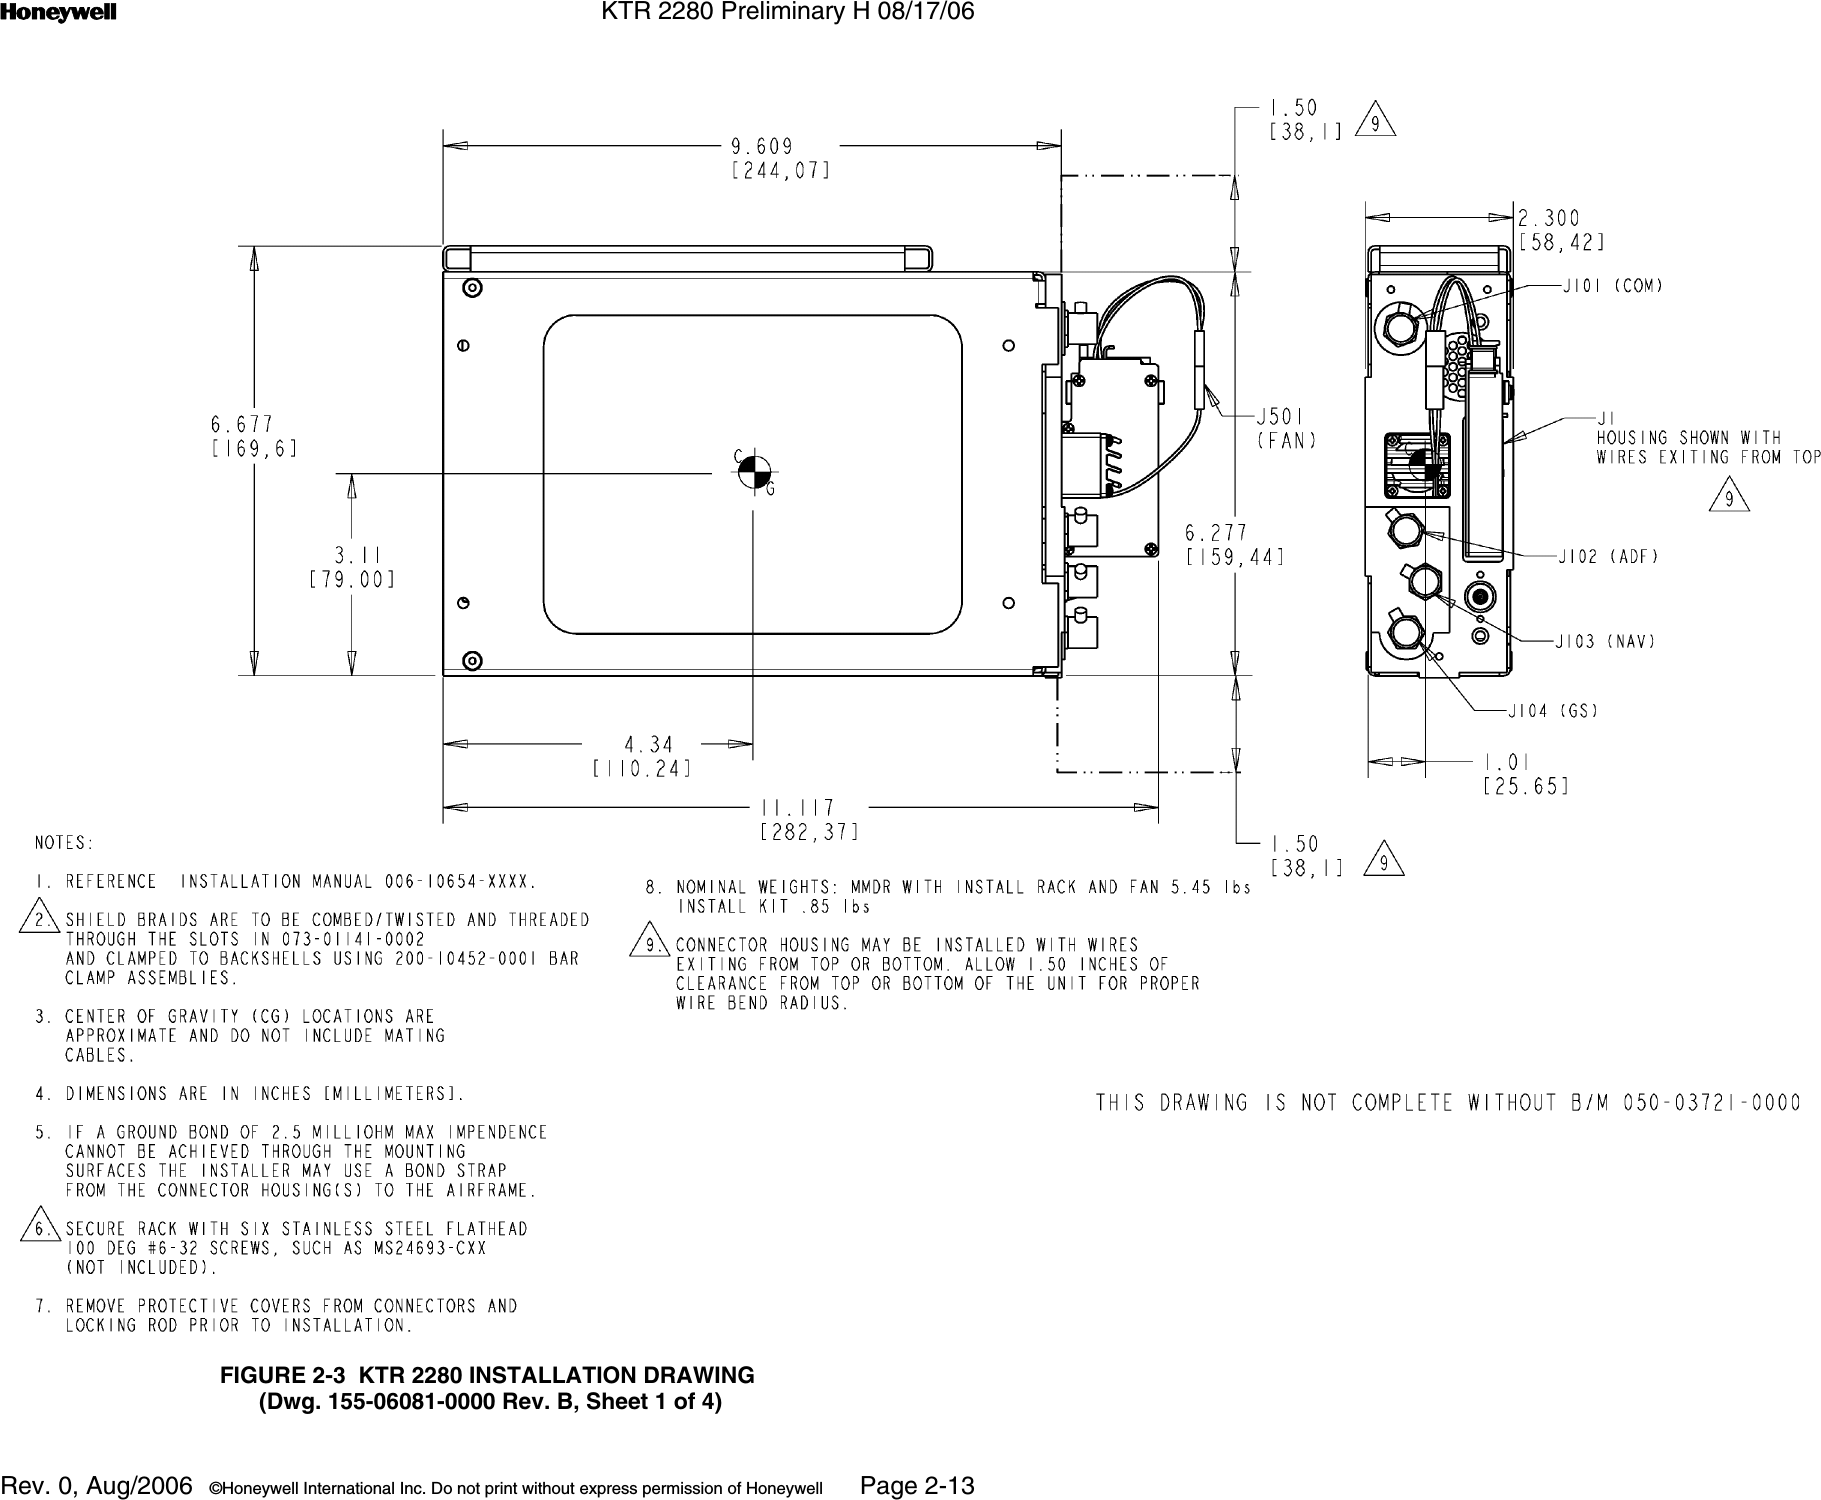 n KTR 2280 Preliminary H 08/17/06Rev. 0, Aug/2006  ©Honeywell International Inc. Do not print without express permission of Honeywell Page 2-13FIGURE 2-3  KTR 2280 INSTALLATION DRAWING (Dwg. 155-06081-0000 Rev. B, Sheet 1 of 4)